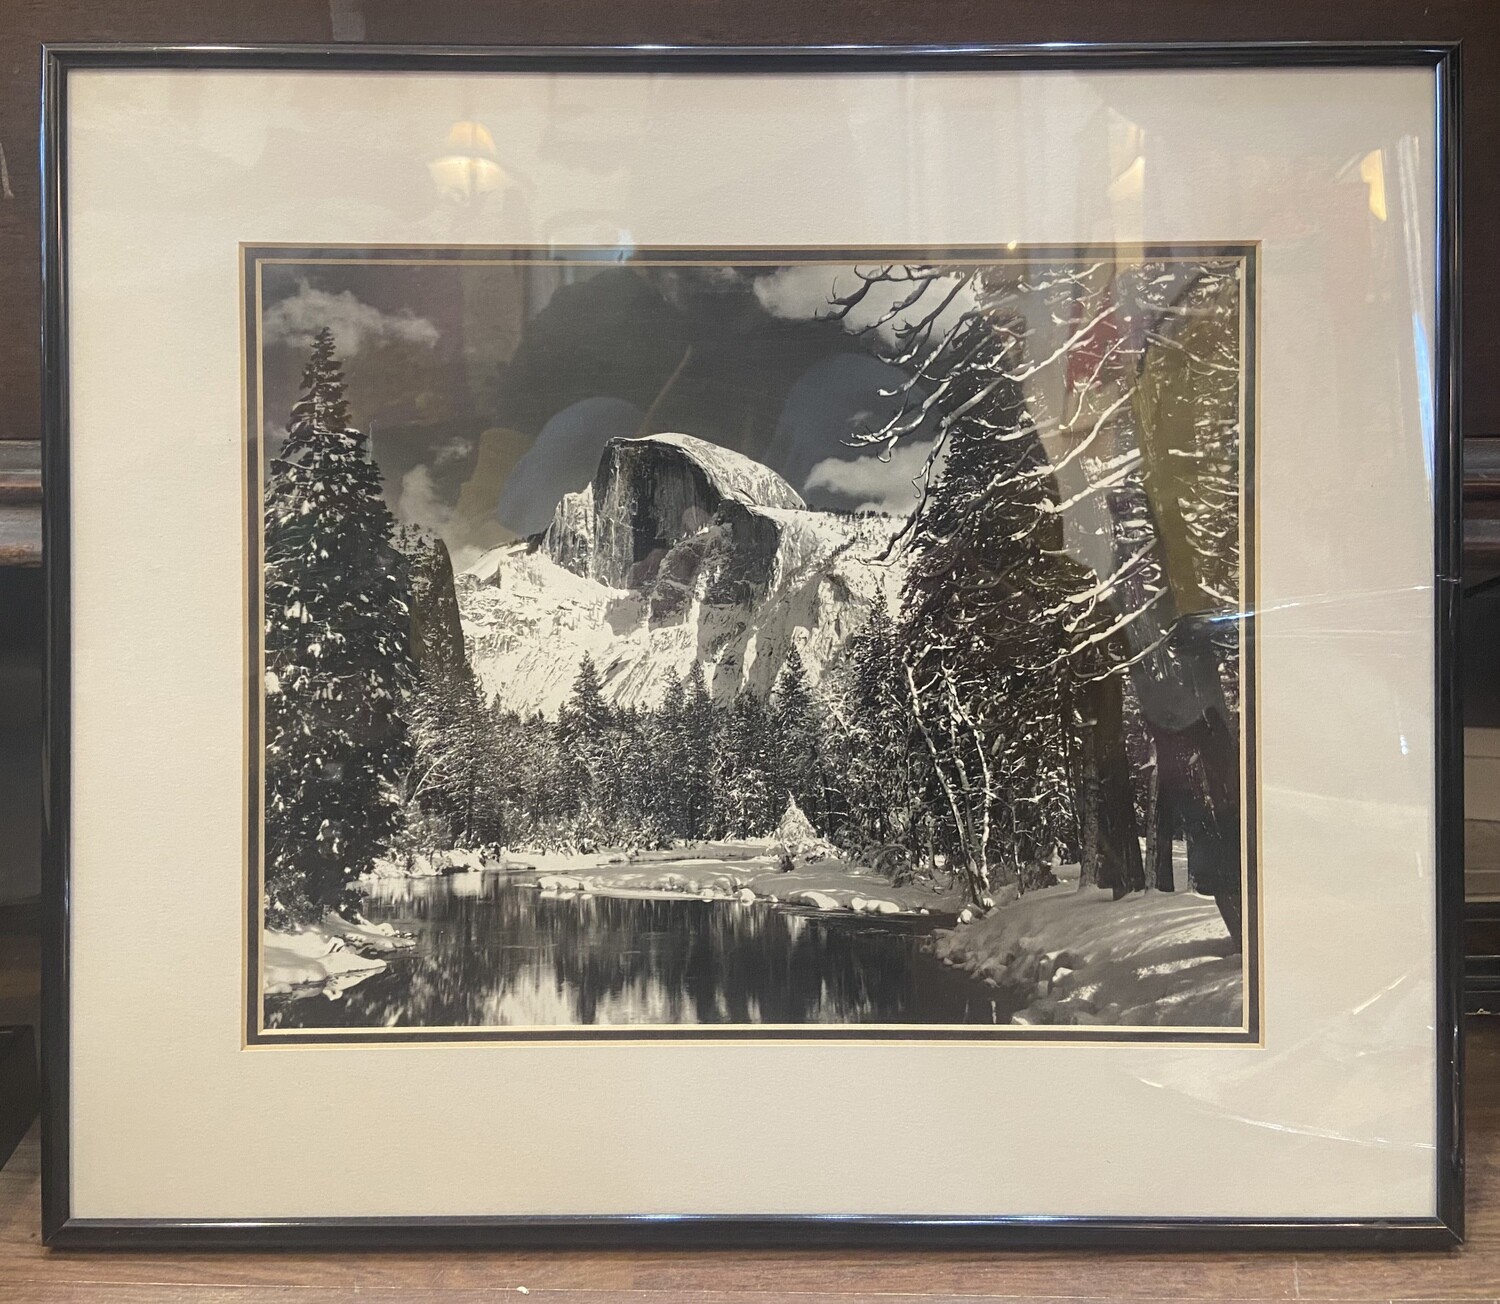 Snowy Mountain Black and White Framed Photo 18” x 16”